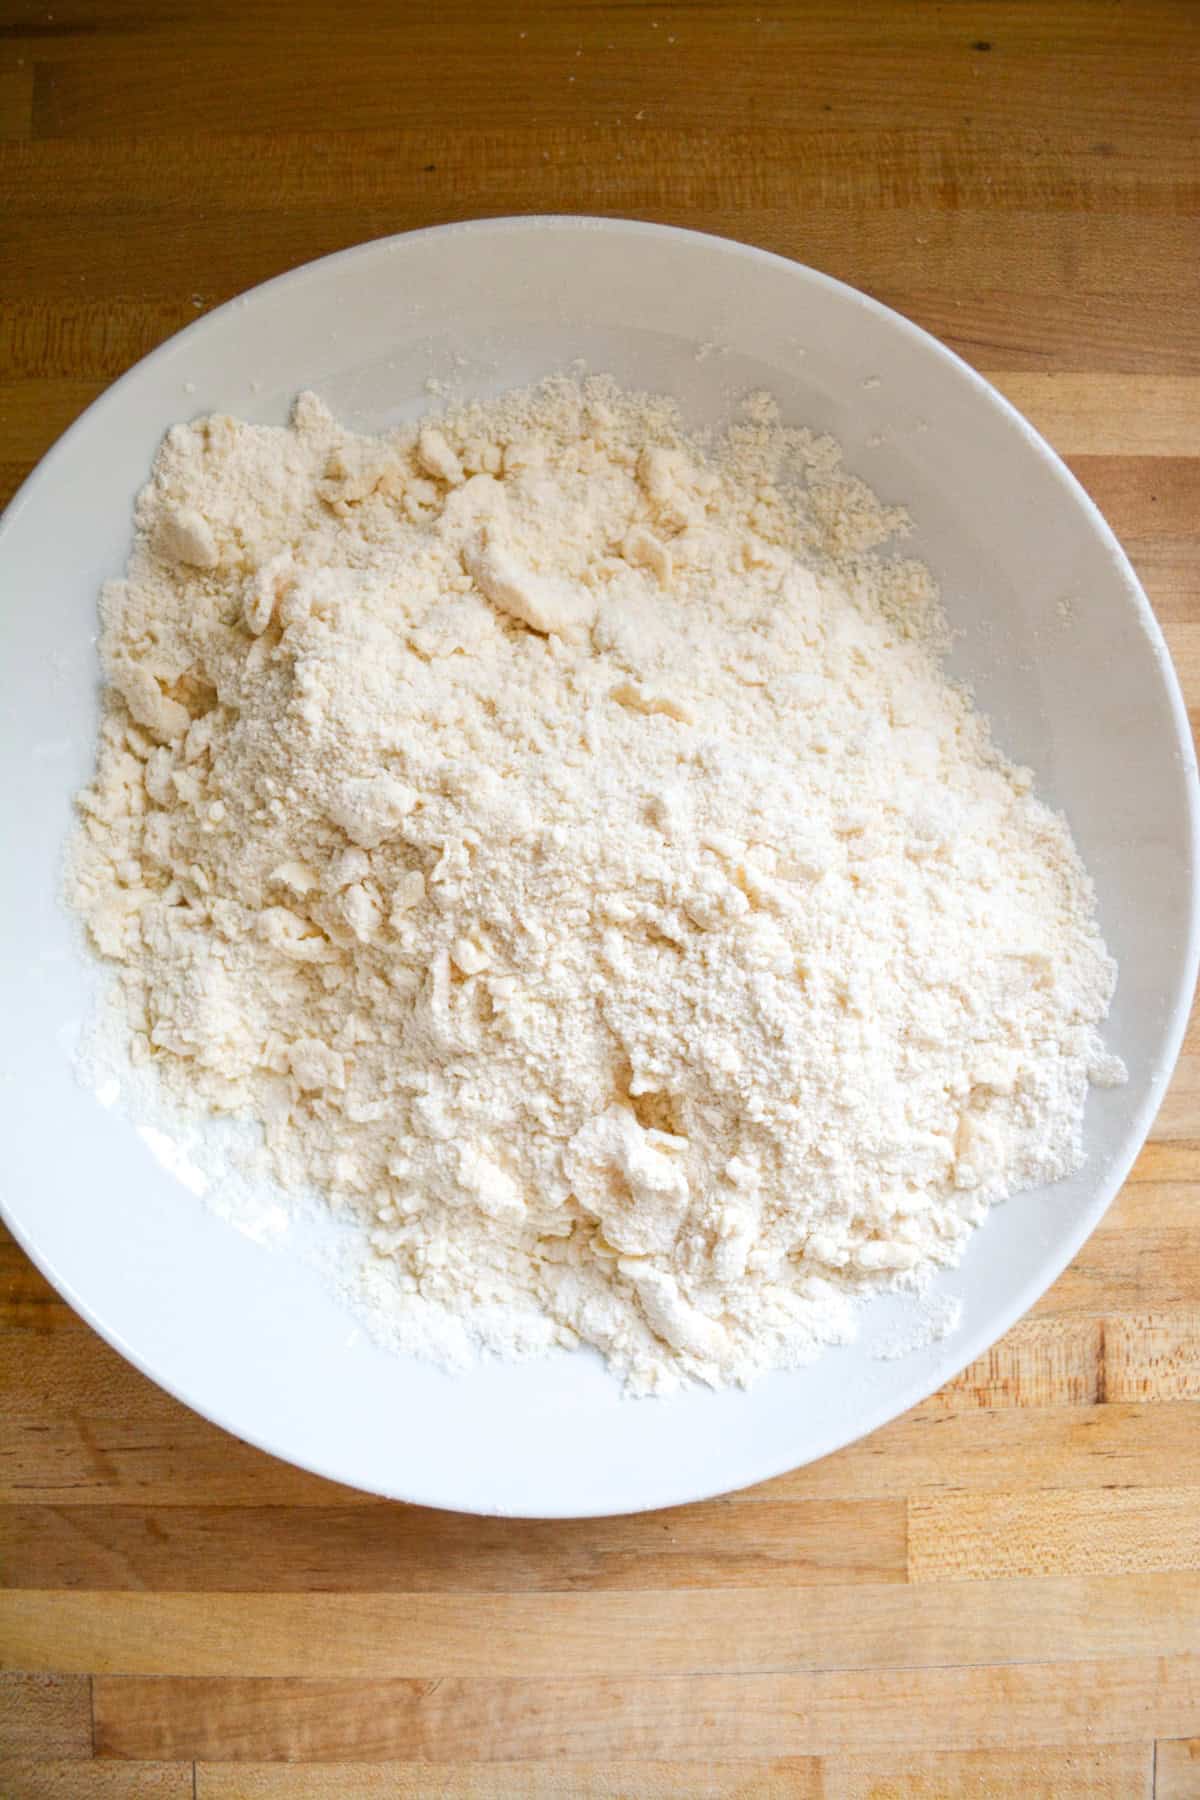 Butter cut into the dry ingredients in a large mixing bowl.